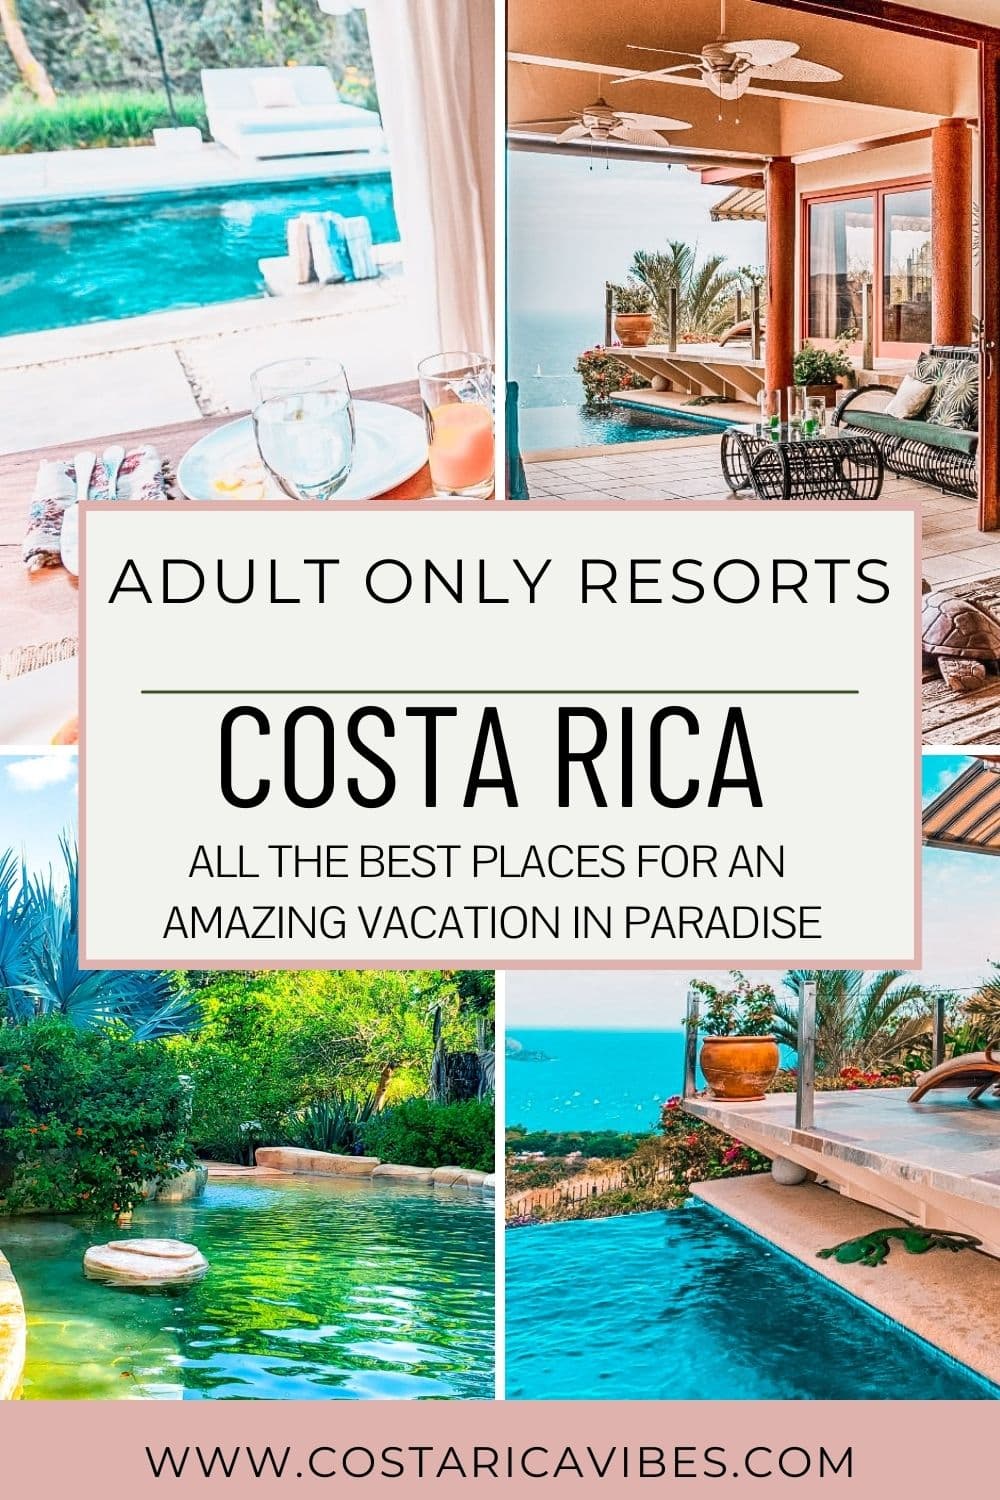 Adult Only Resorts in Costa Rica - 7 Great Places